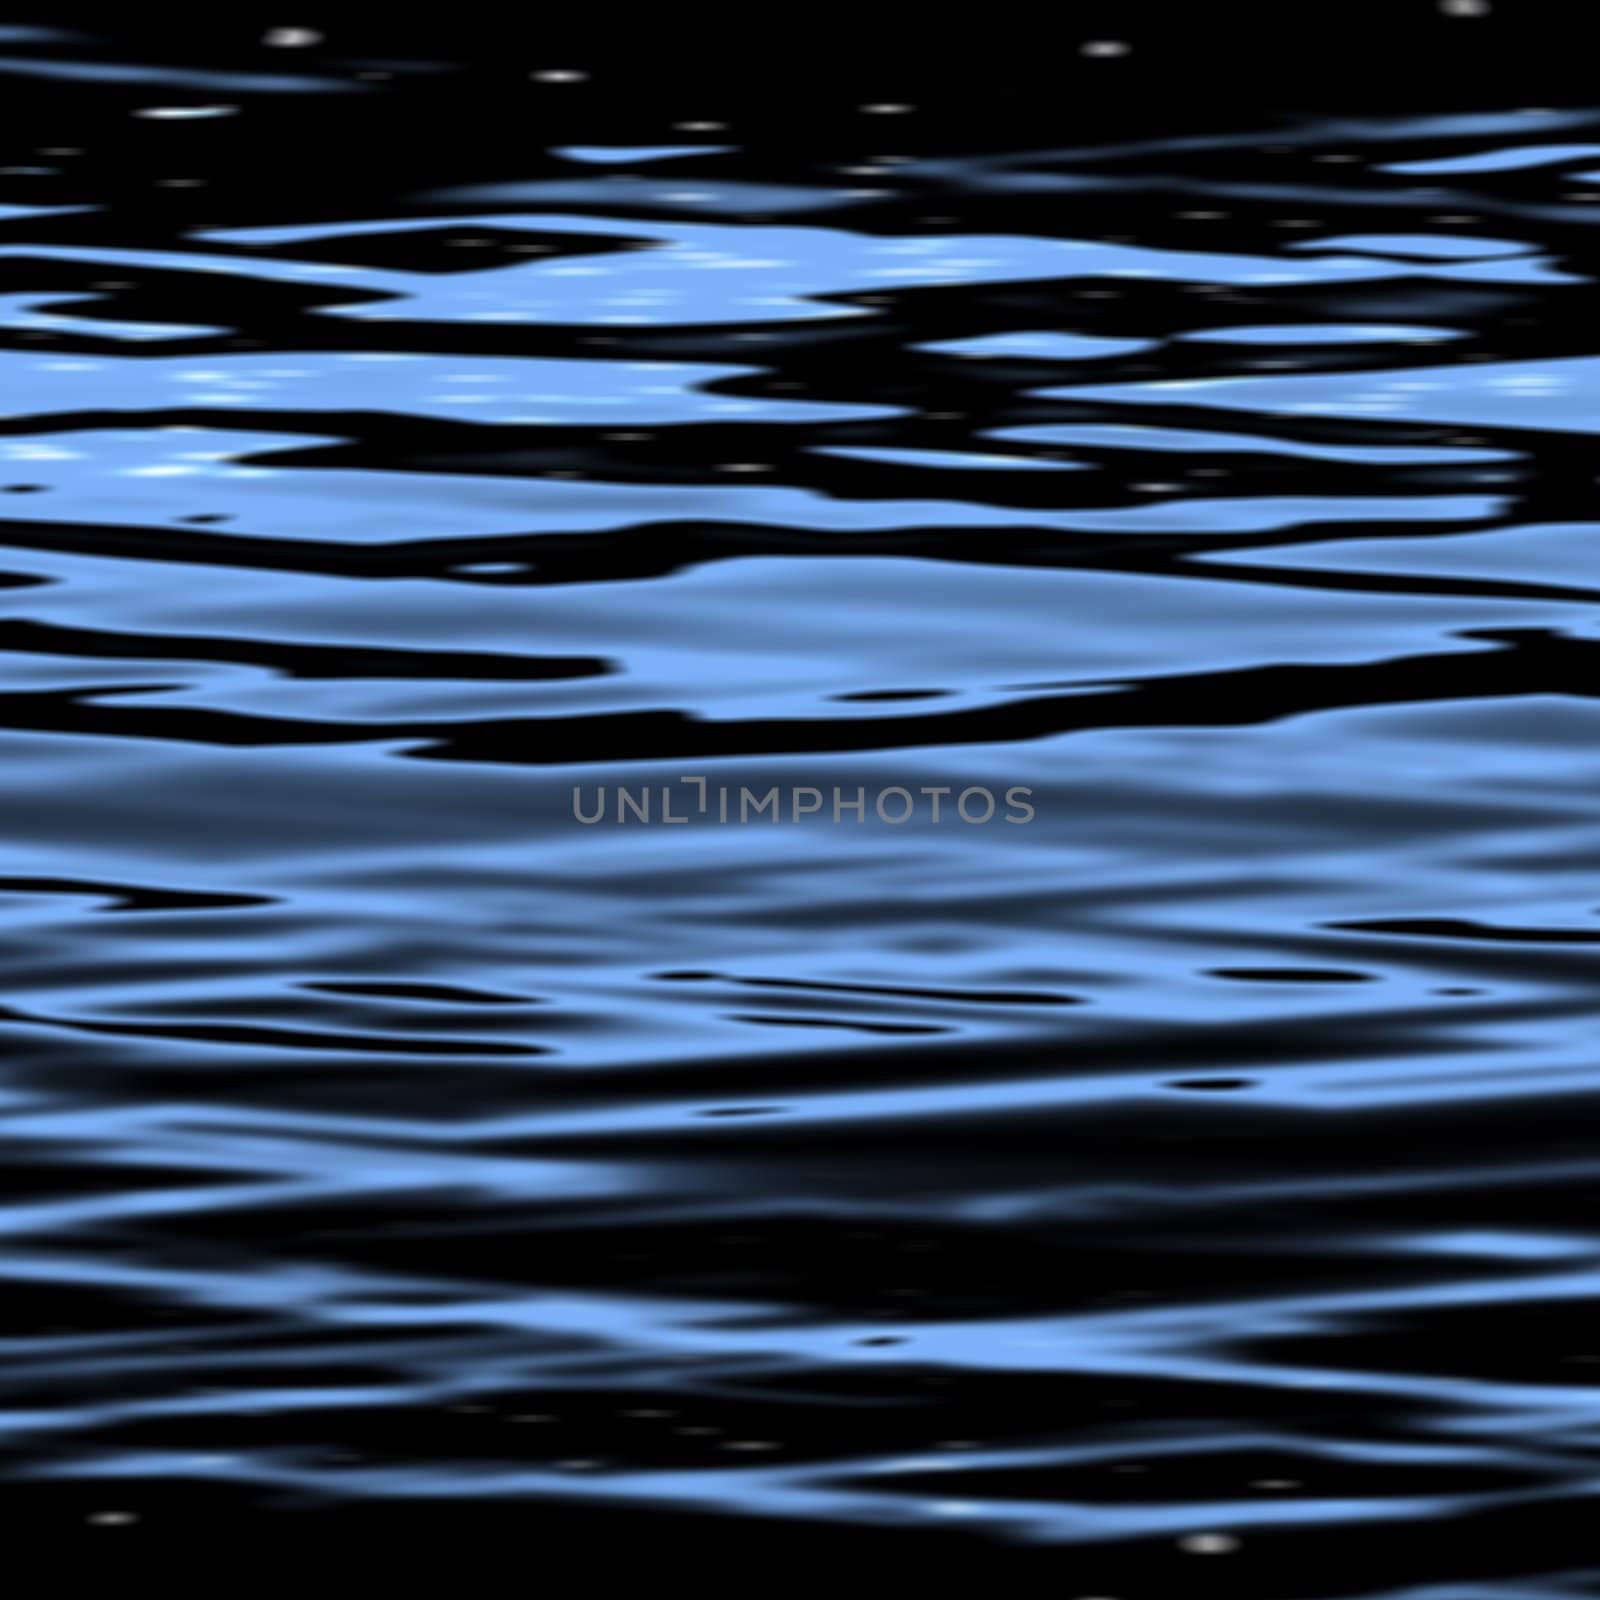 sea water surface